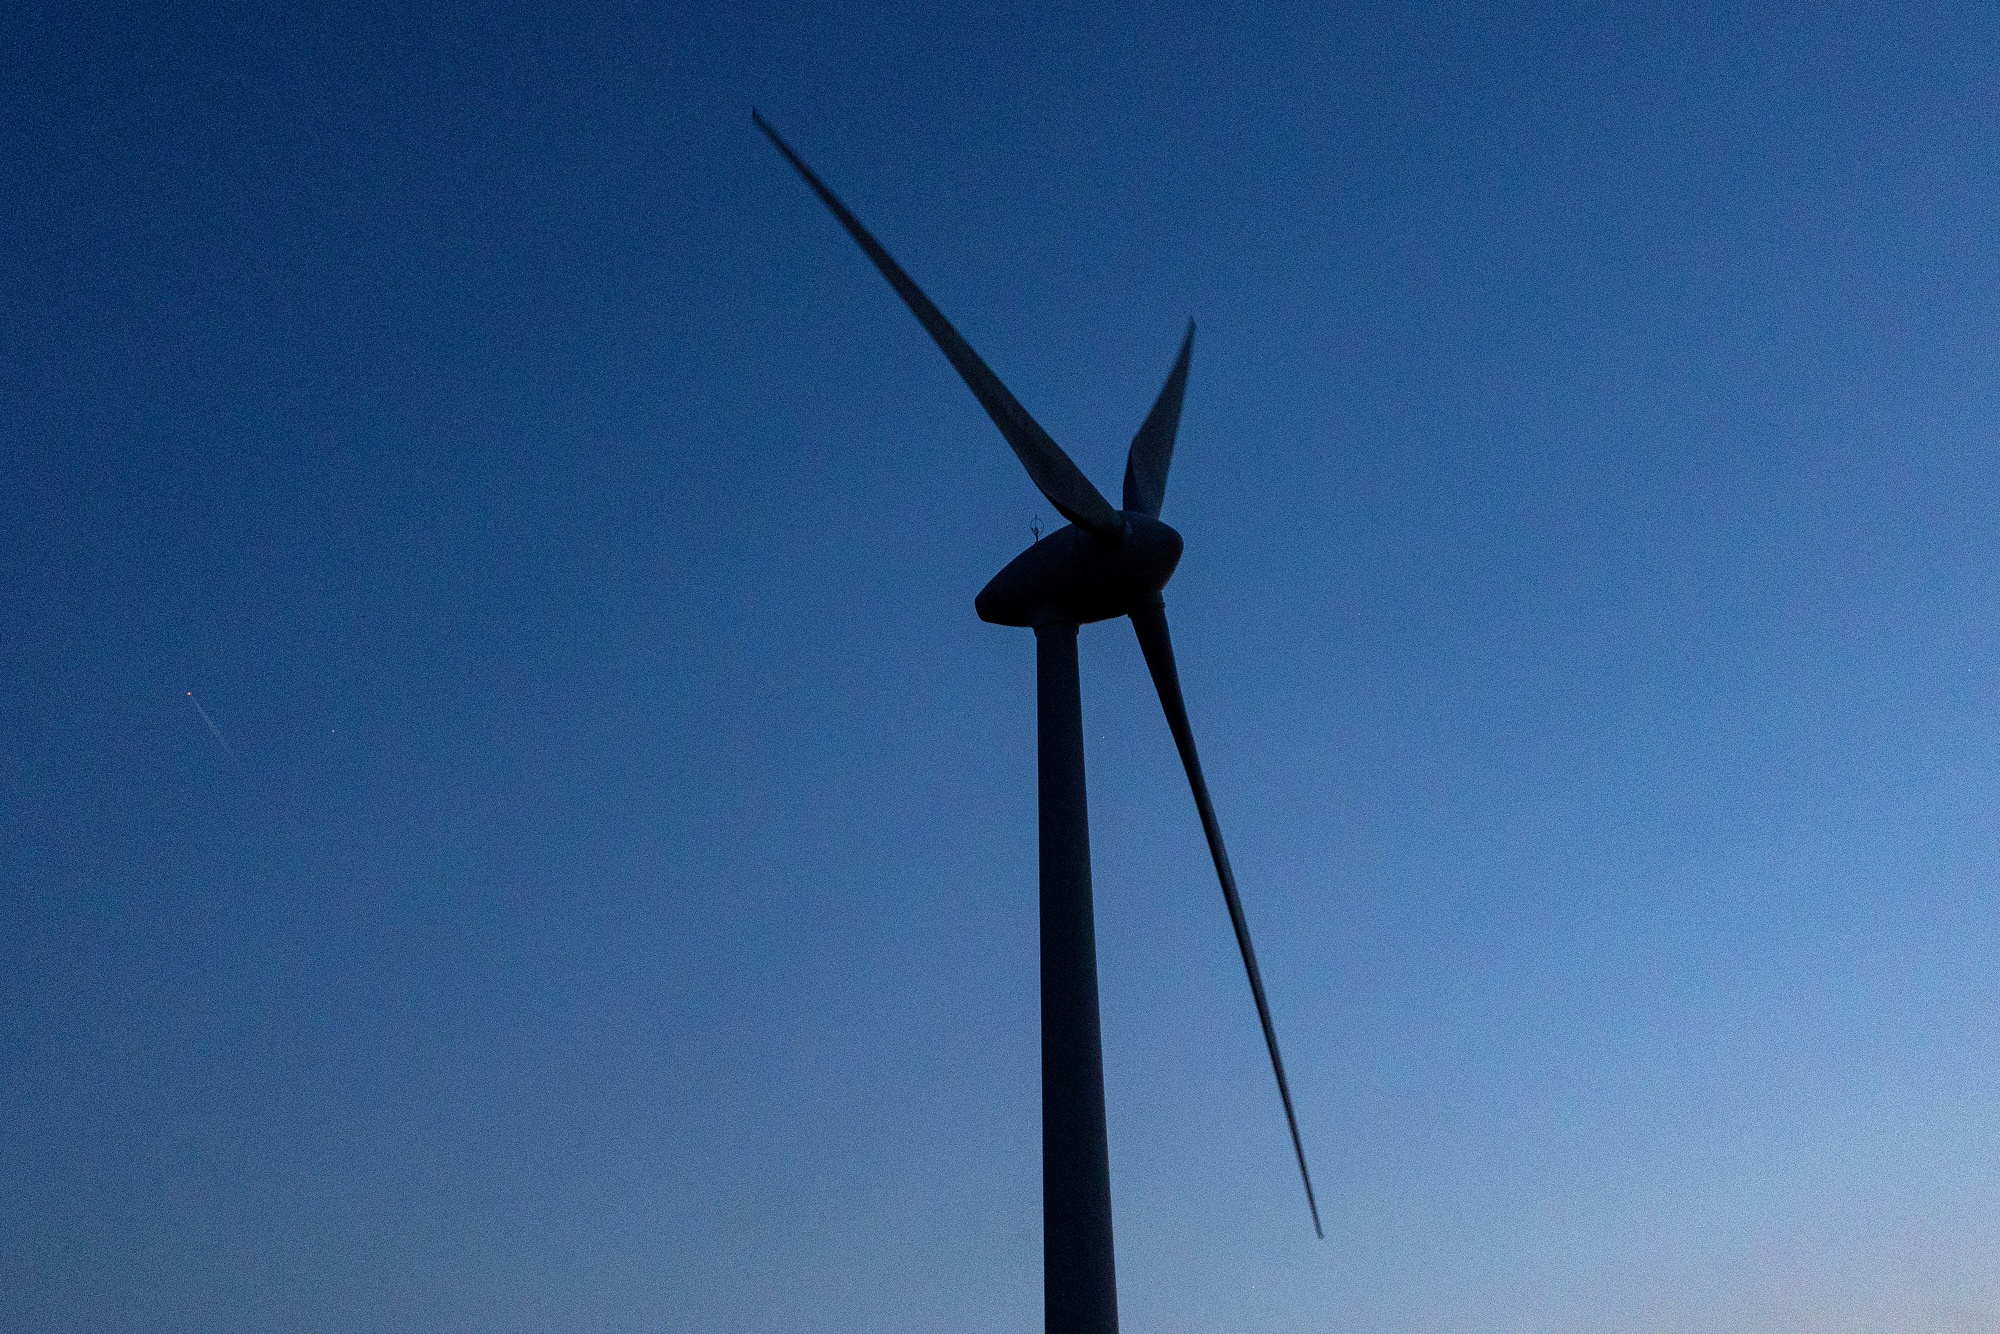 Japan's Mitsui to Invest in $6.5 Billion Offshore Wind Project in